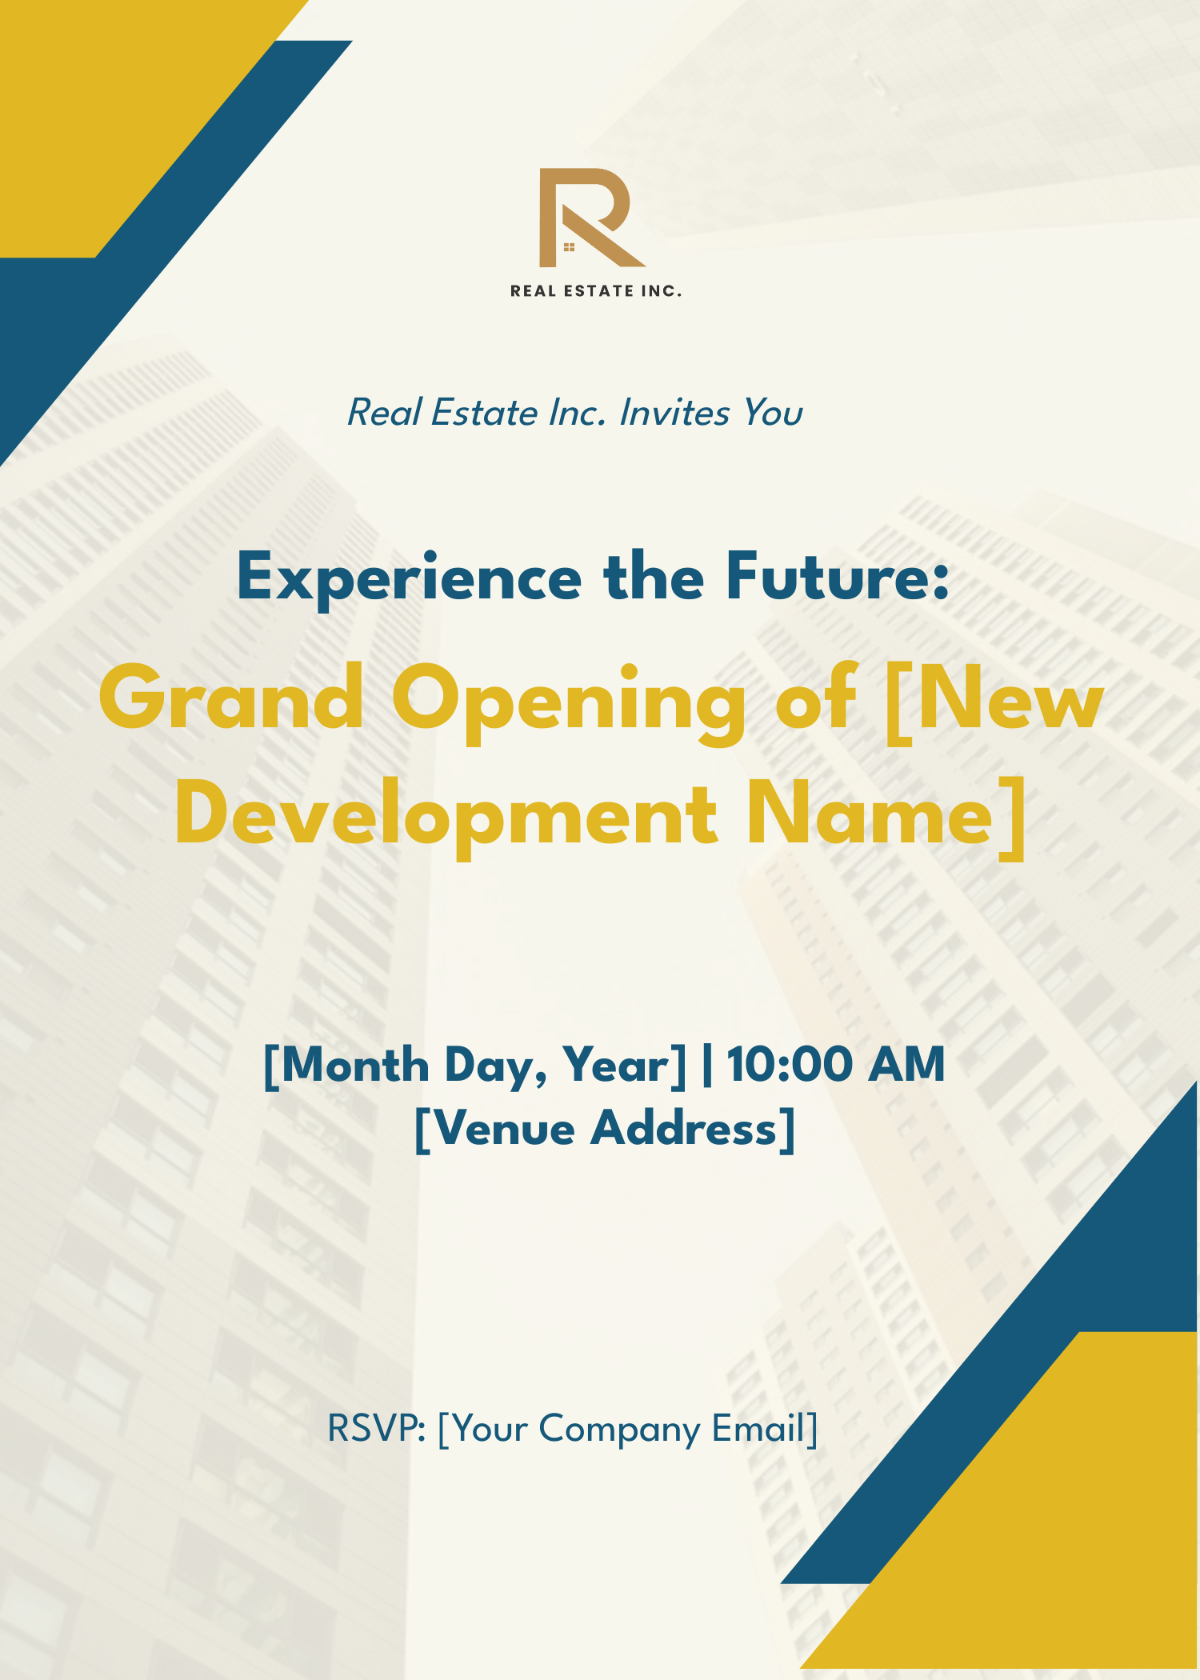 Grand Opening of New Development Invitation Card Template